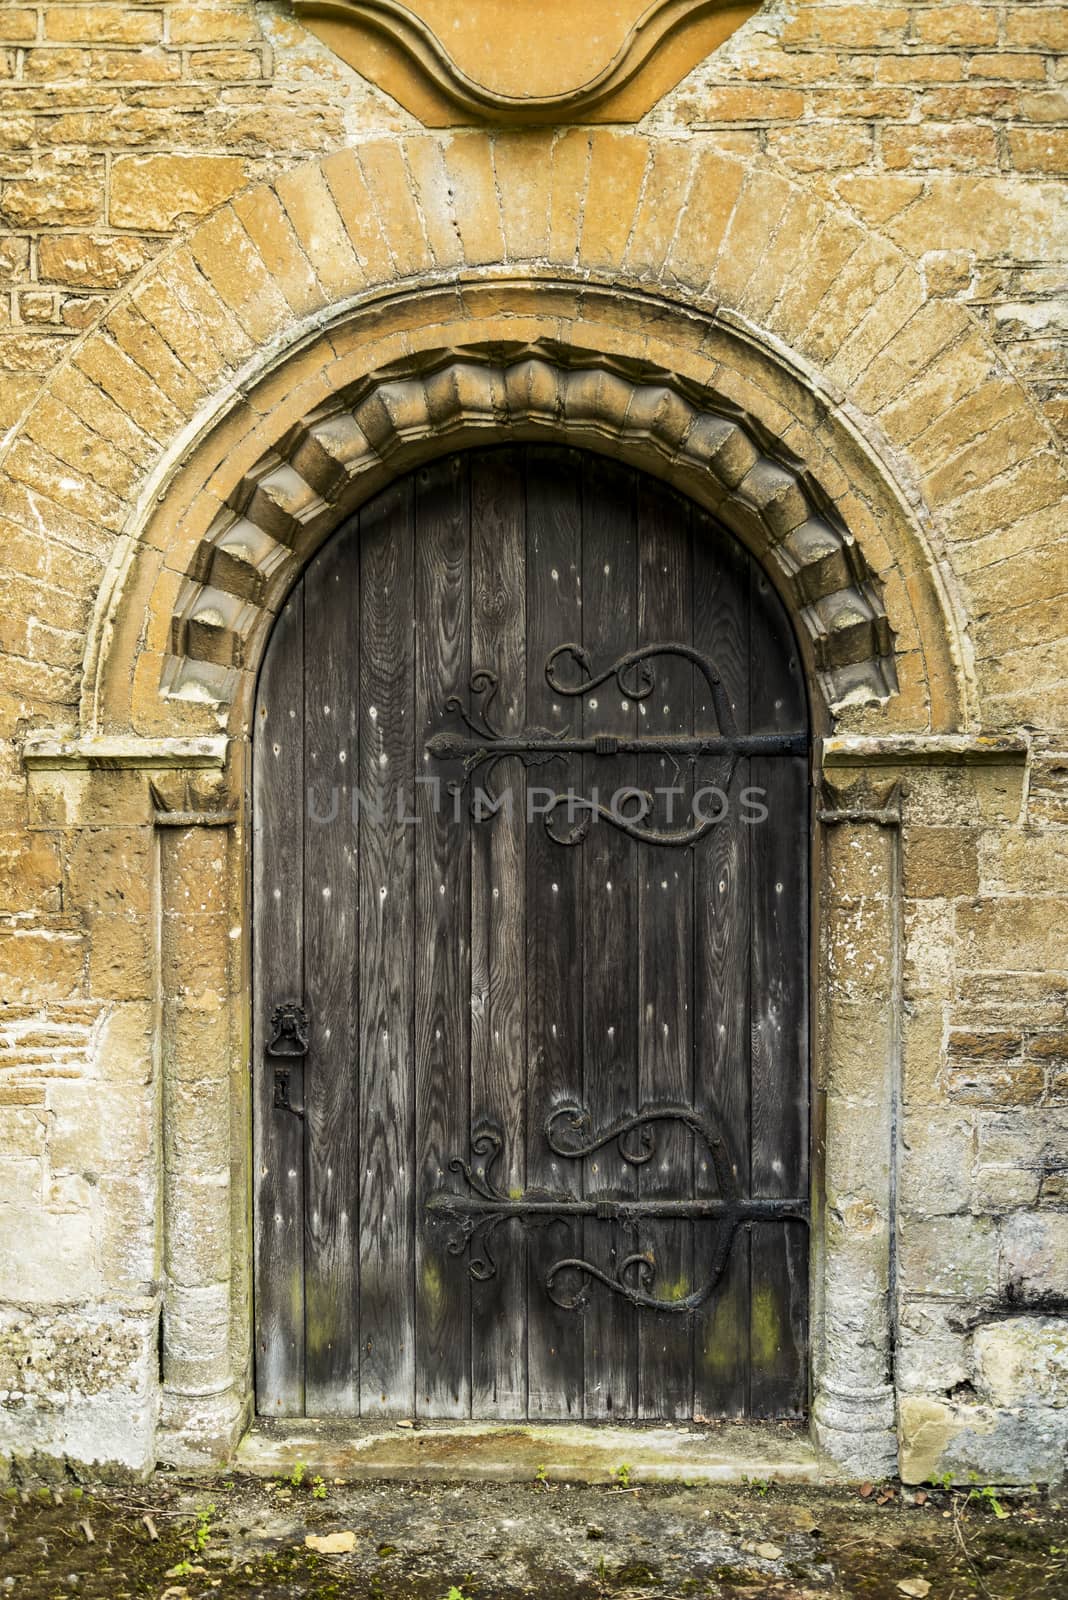 The beautifully detailed doorway of a British church